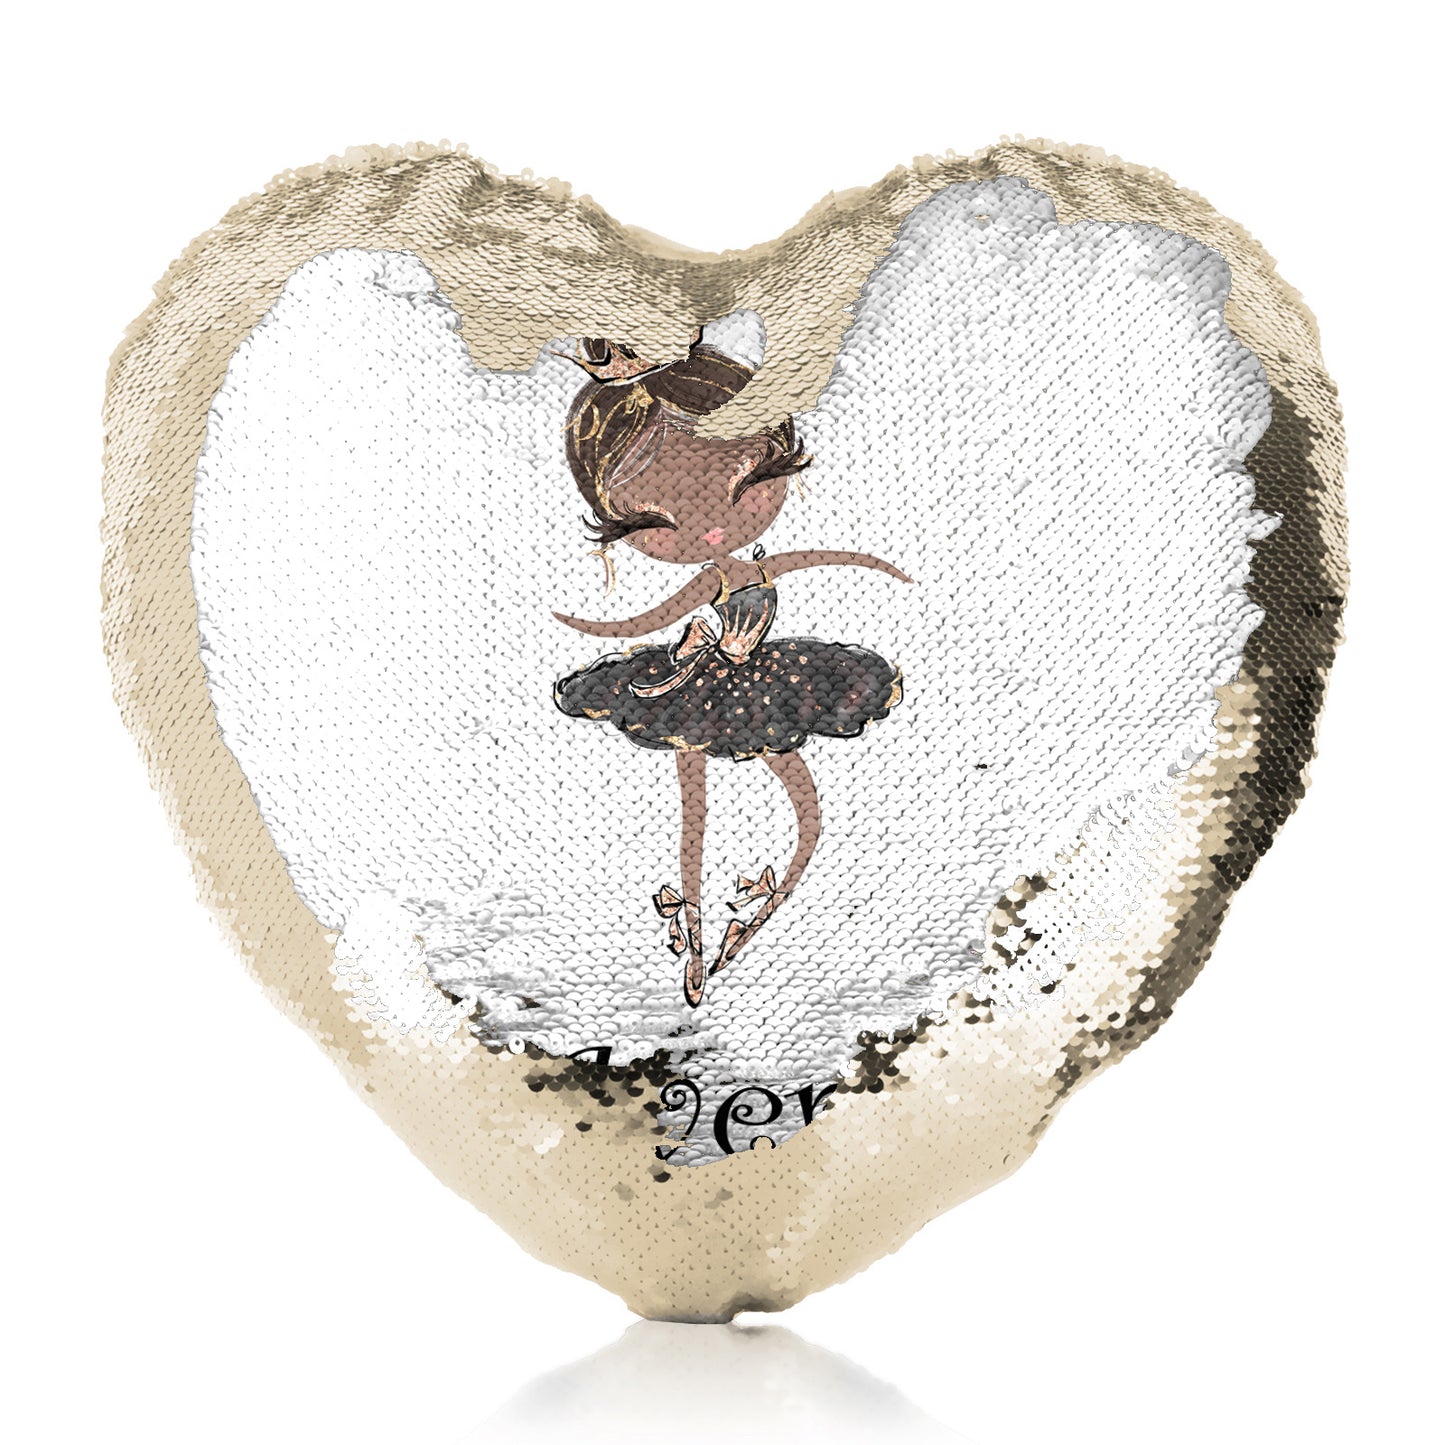 Personalised Sequin Heart Cushion with Cute Text and Black Hair Black Dress Tiara Ballerina